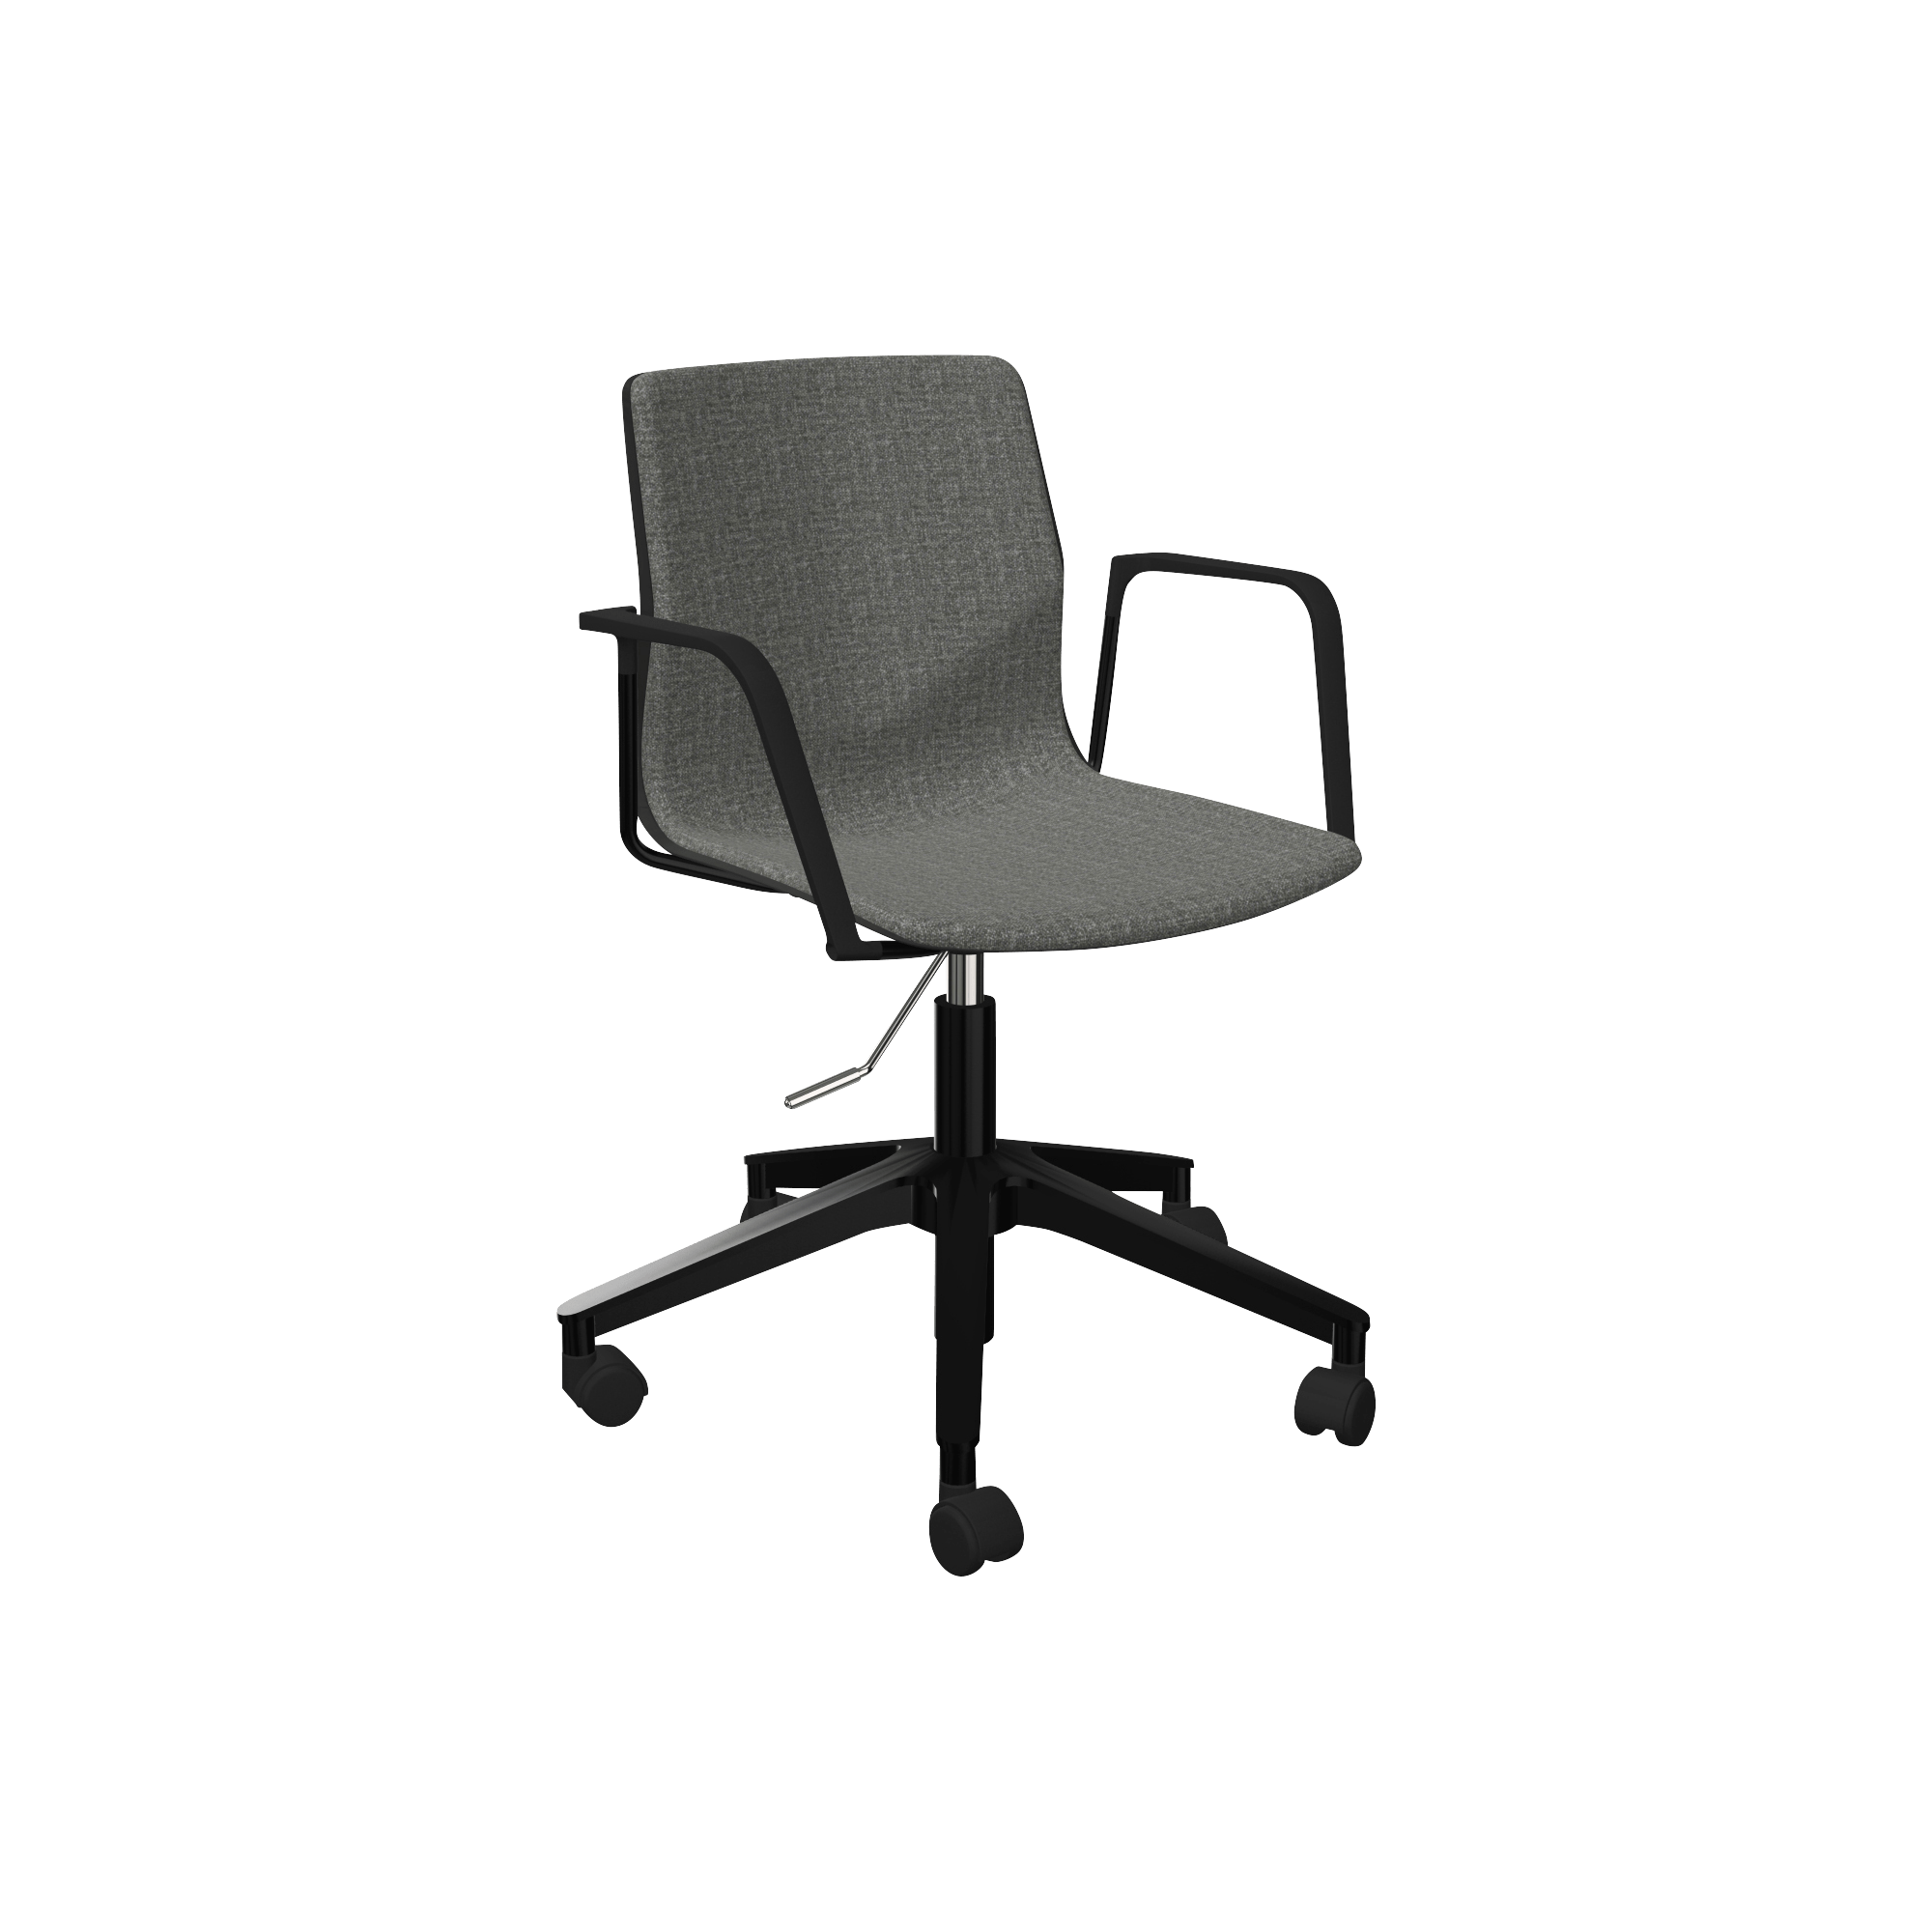 Grey adjustable height office chair with wheels and arm rests